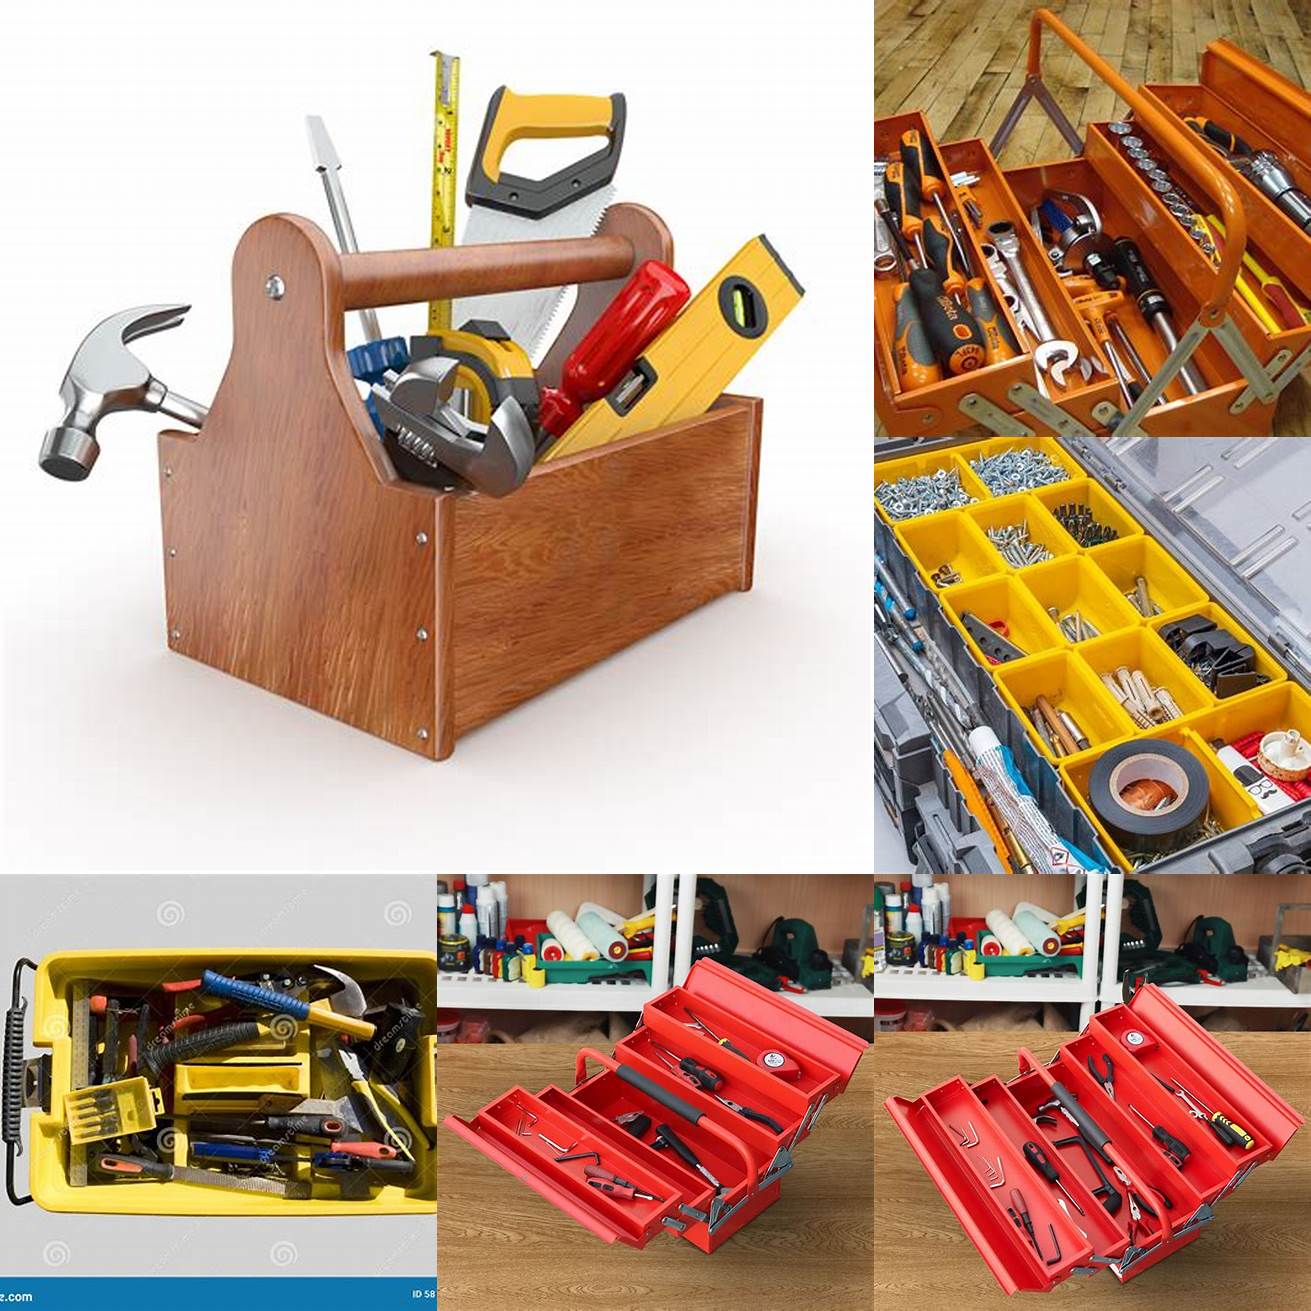 A toolbox filled with various tools and equipment